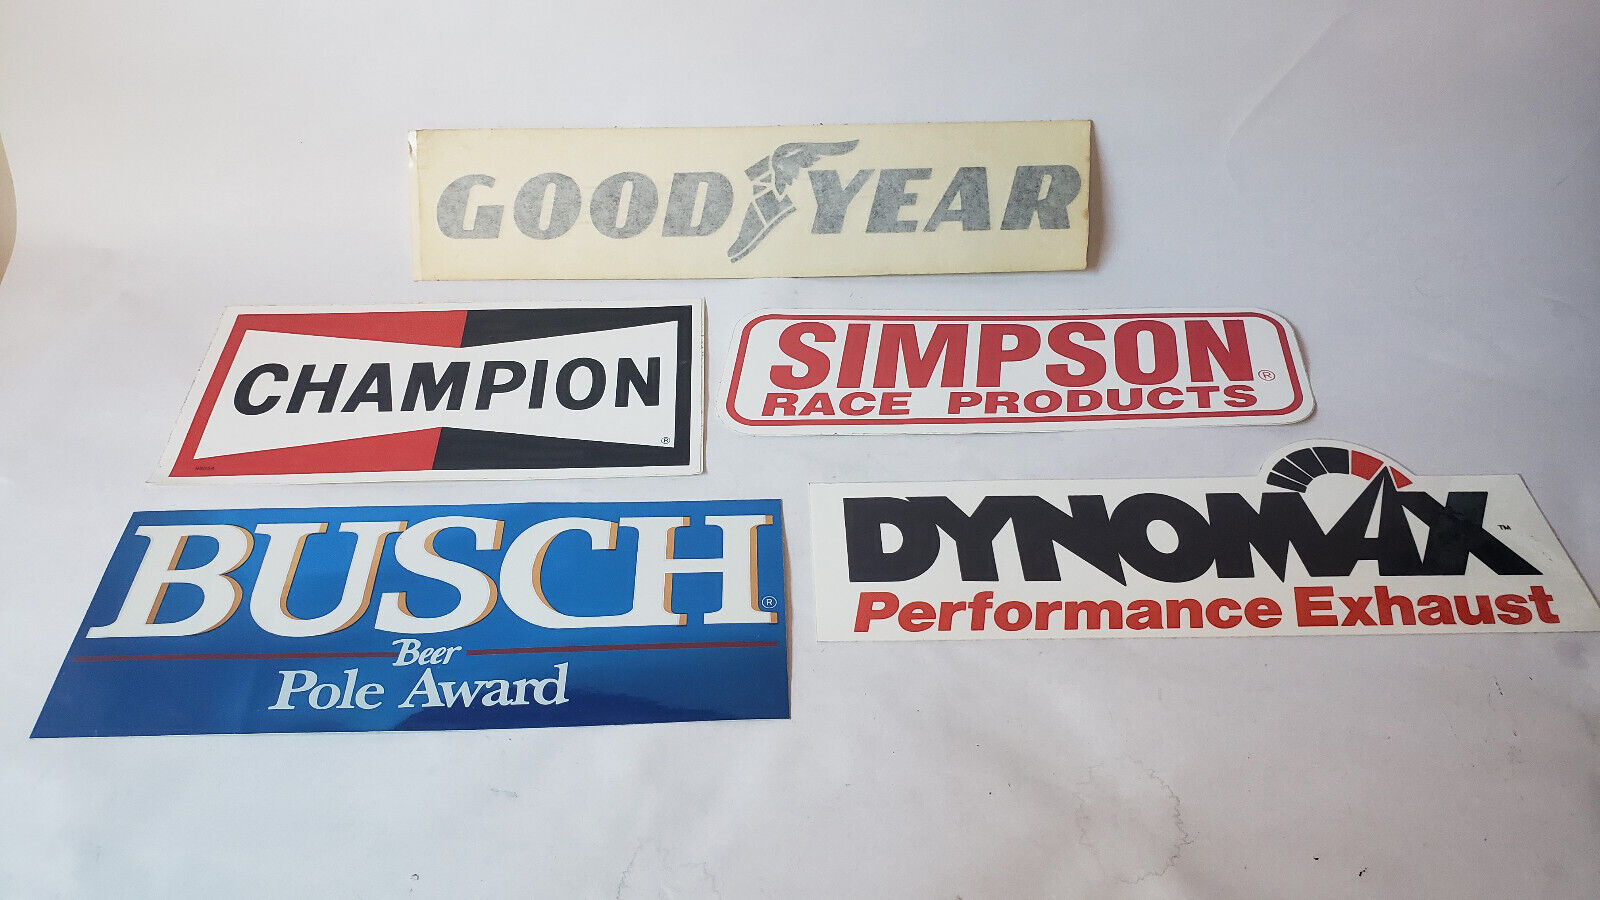 Lot of 5 vintage racing decals / stickers Champion - Goodyear - Busch Beer